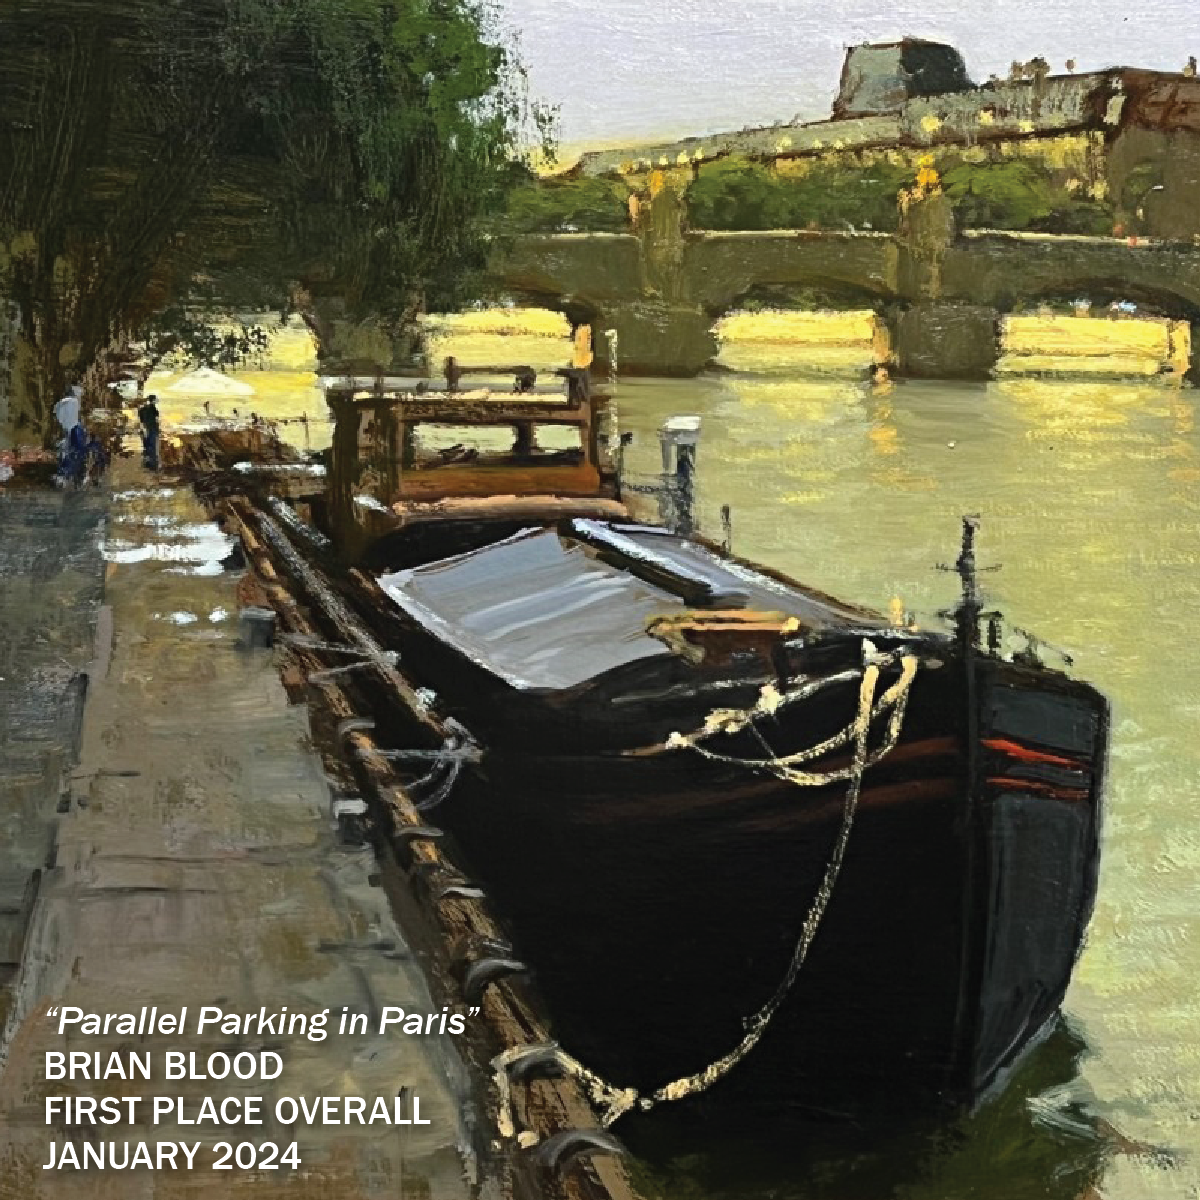 13th Annual PleinAir Salon Online Art Competition January First Place Winner Brian Blood's painting of Parallel Parking in Paris. A boat moored on the river